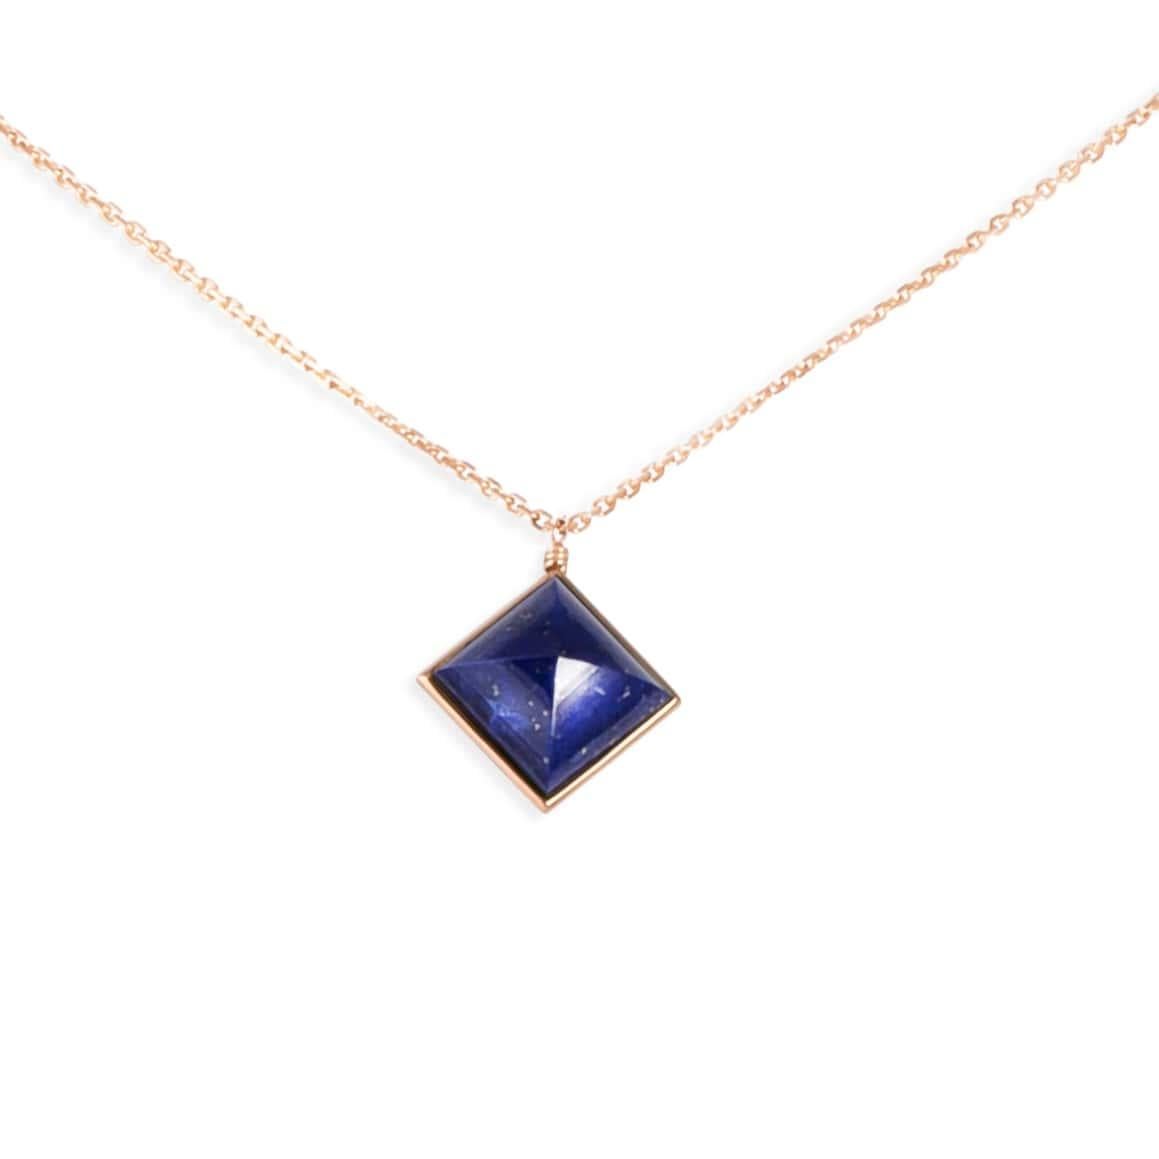 18 Carat Yellow Gold “Sautoir” Necklace with Lapis Lazuli and Diamonds Pavé Plates. HAND CARVED STONES made from a specific unique designed. HANDCRAFTED IN FRANCE.
The Designer, Bénédicte, decided to Produce all her Creations in her Country of